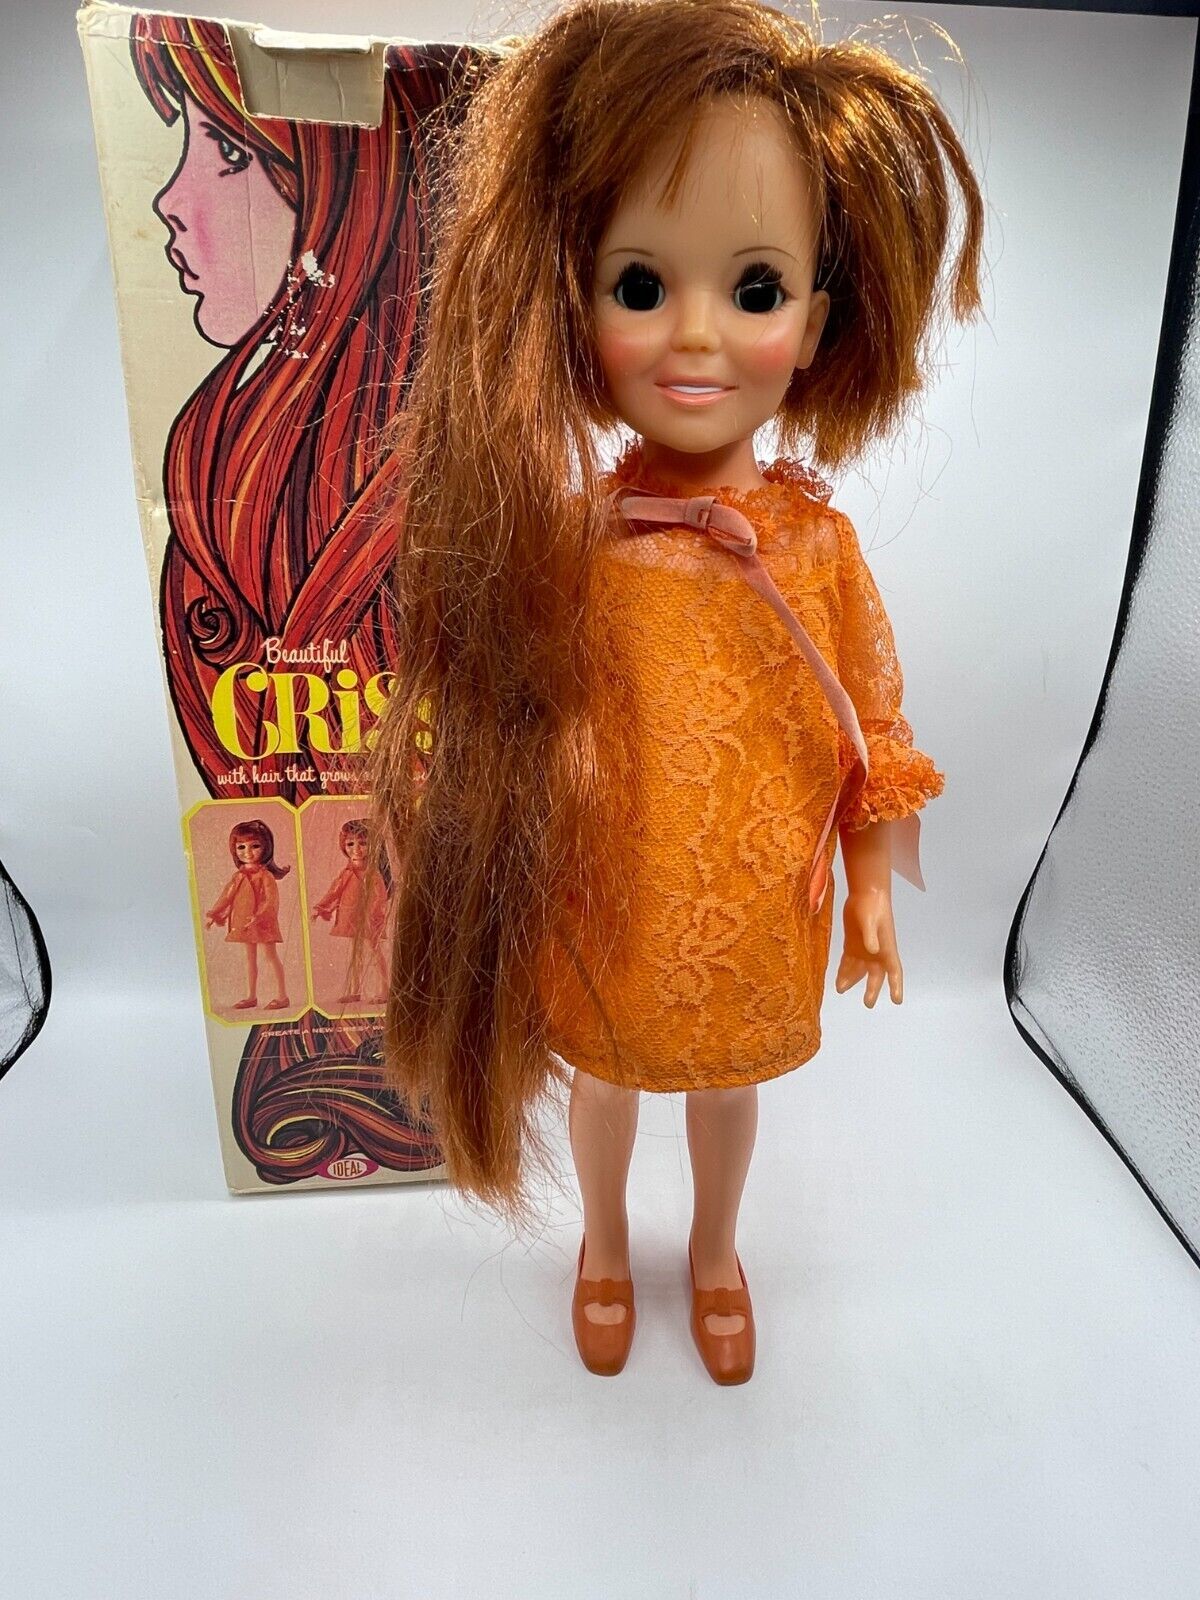 Vintage Ideal Crissy 18" Doll Grow her Hair to the Floor & Original Box 1969 - $33.24